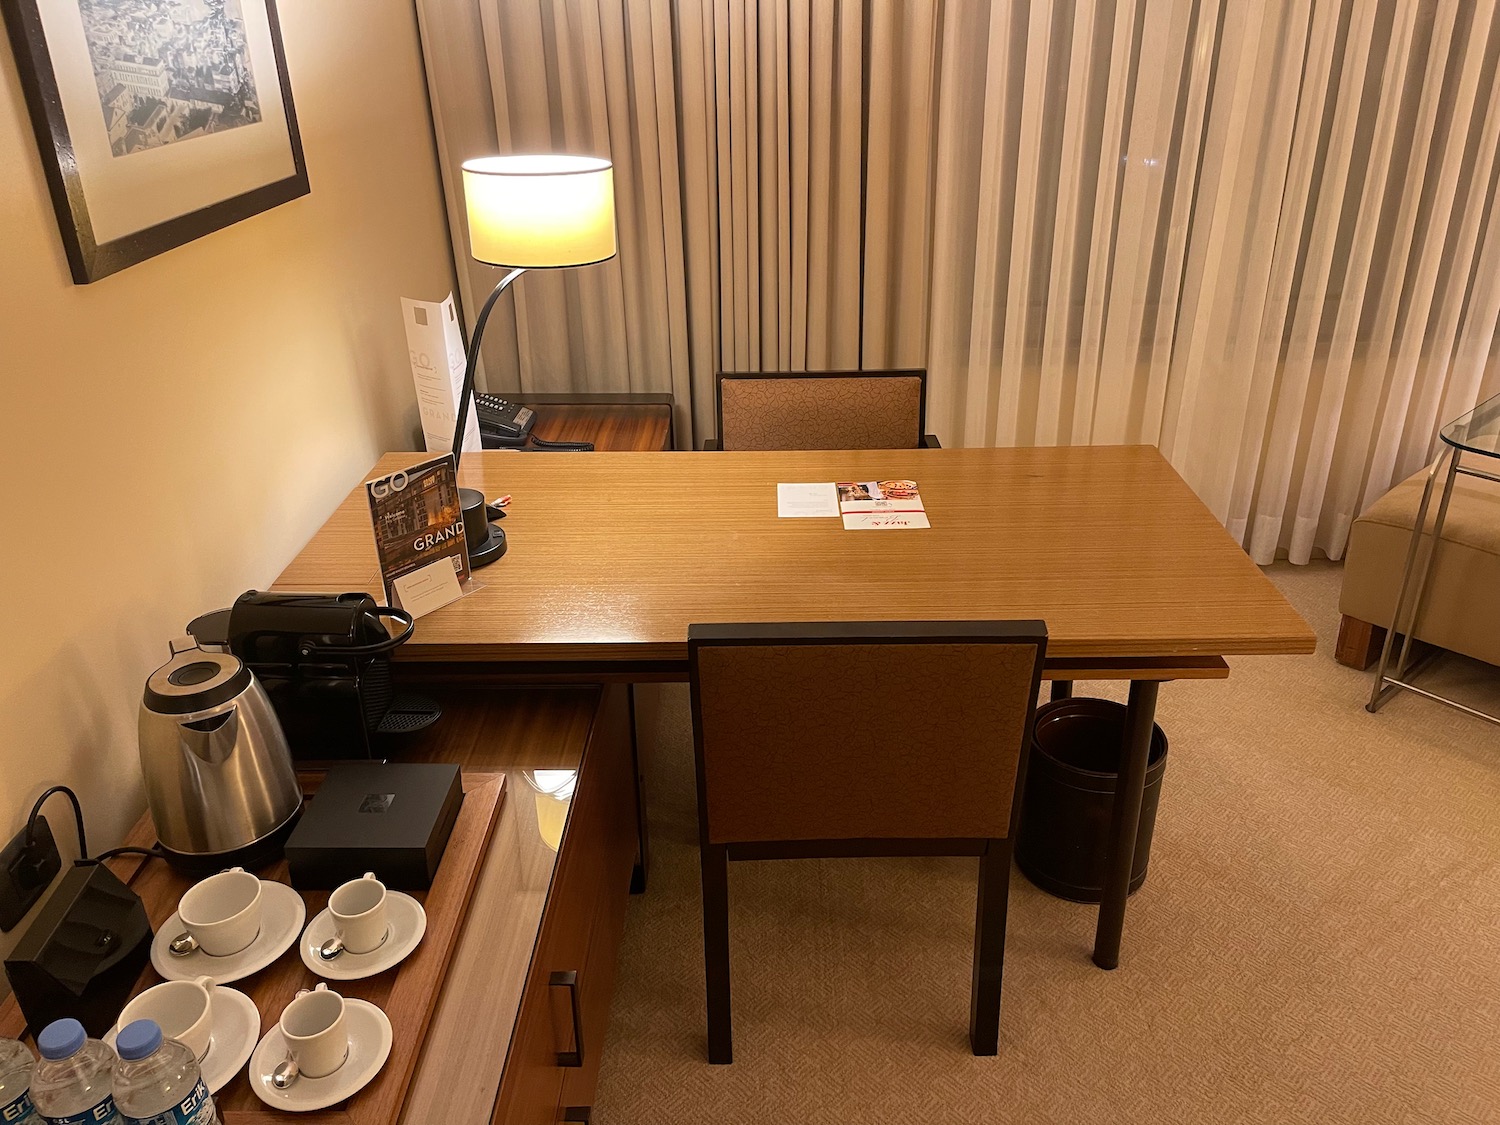 a desk with a lamp and coffee cups on it